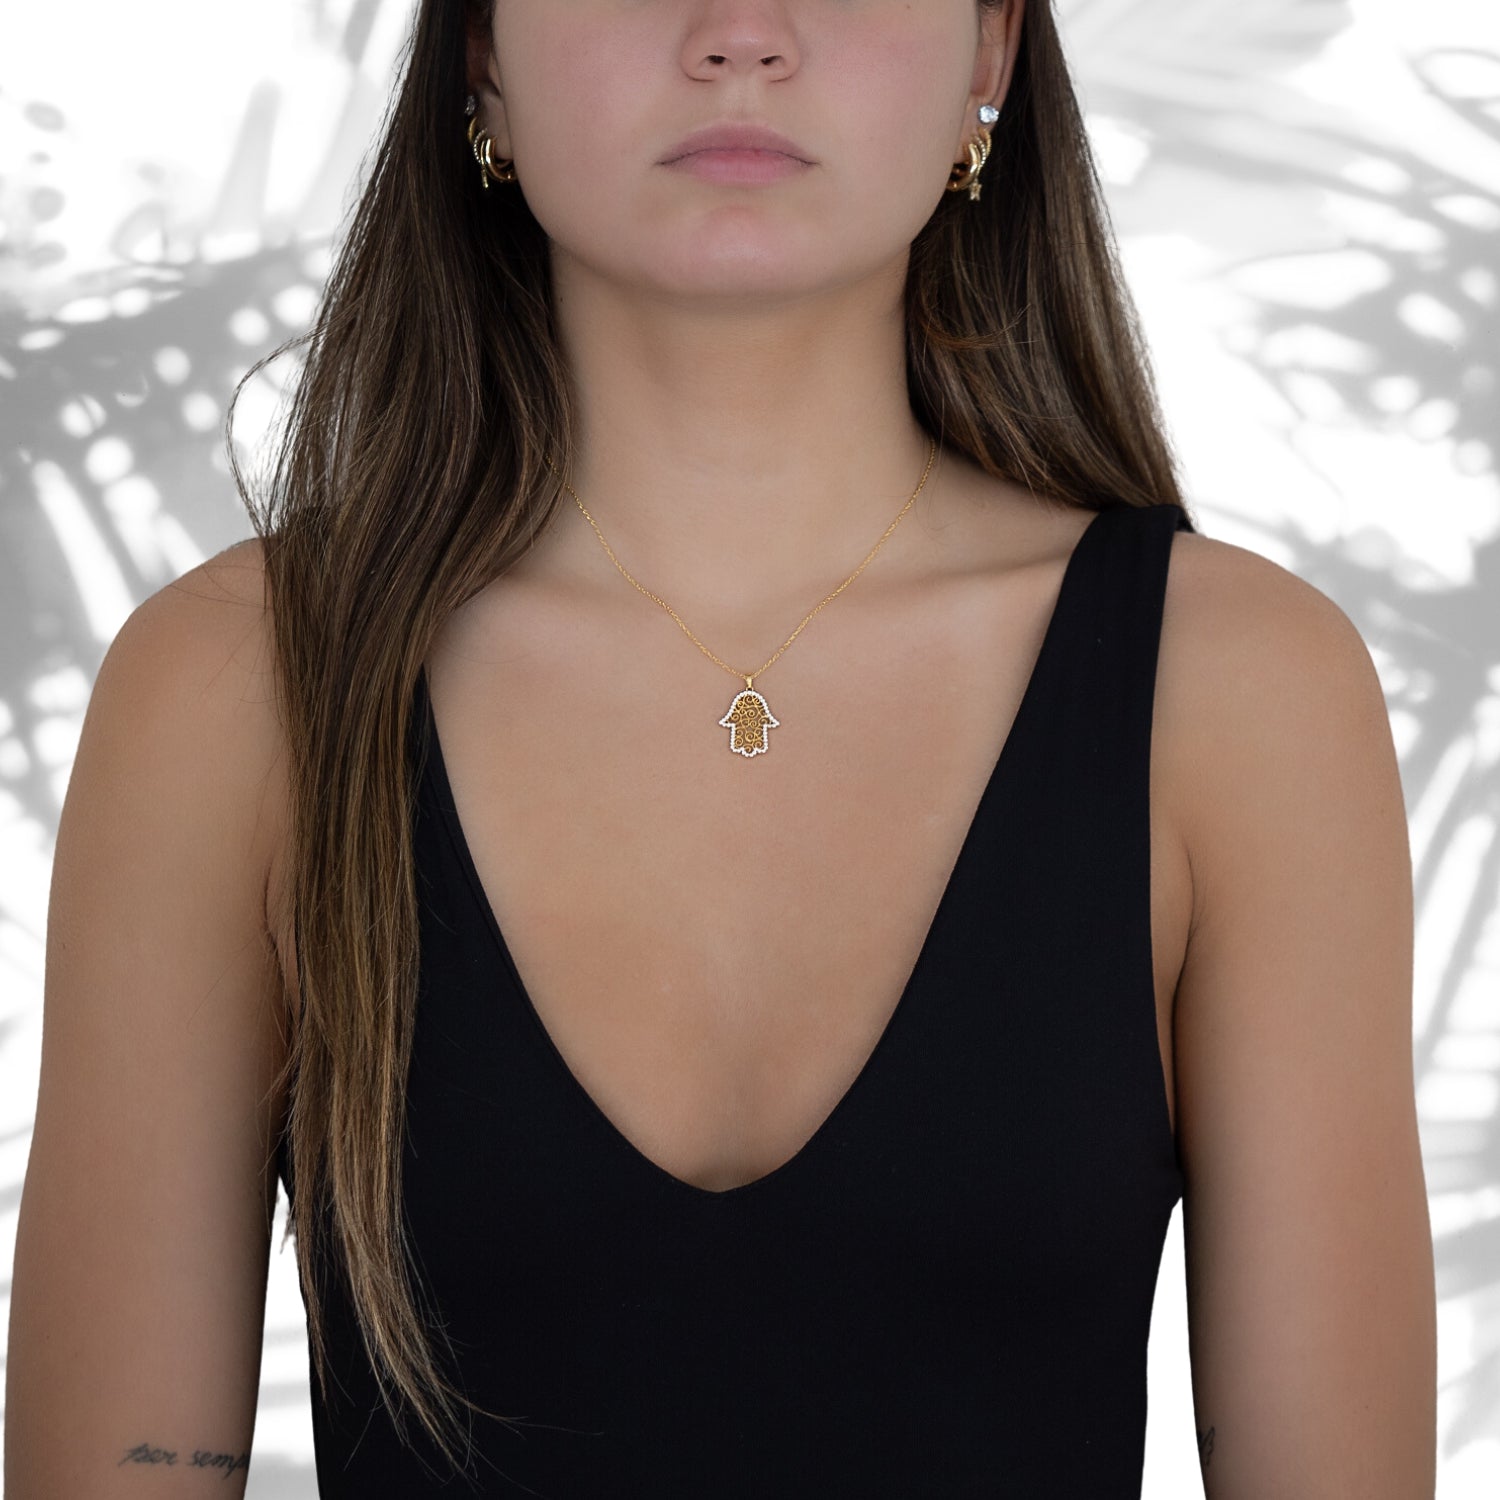 Stylish shot of a model wearing the Gold Spiral Hamsa Necklace, exuding confidence and showcasing the symbolic beauty of the Hamsa pendant.